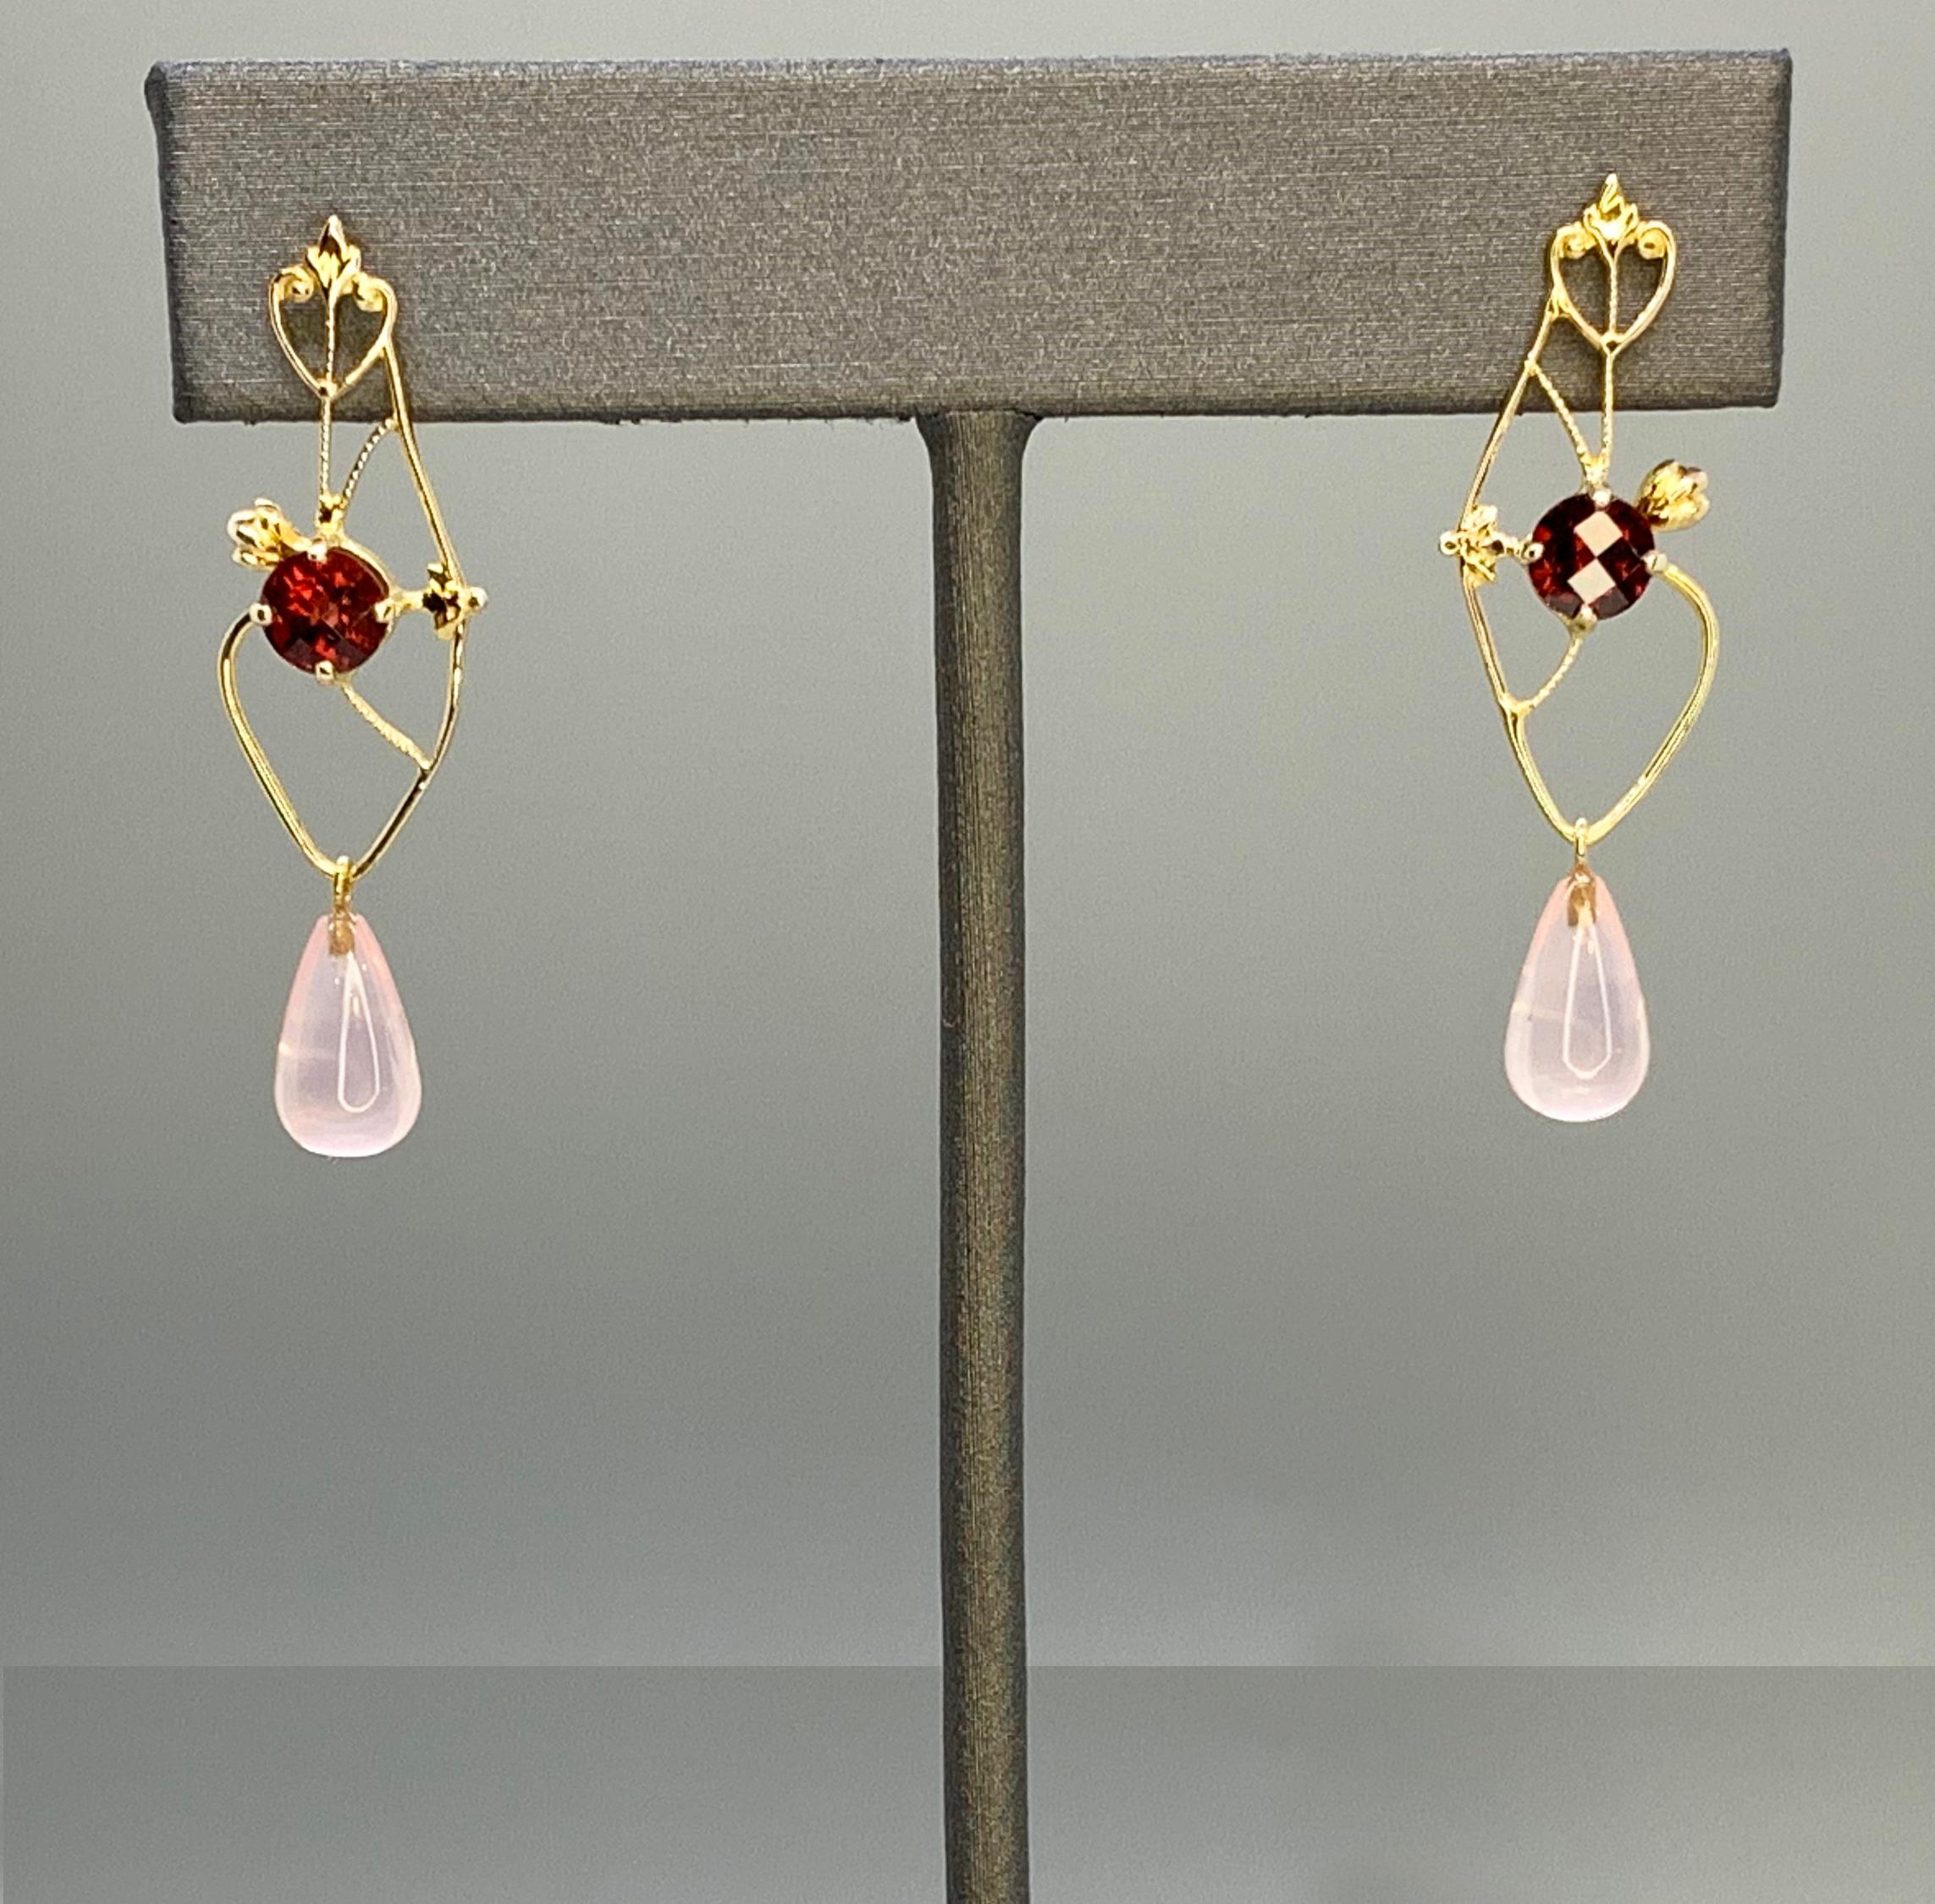 These checkerboard garnet and rose quartz briolette earrings were crafted with upcycled 10k yellow gold from a delicate vintage brooch vintage brooch, likely from the 1920s. The brooch was carefully disassembled, rearranged, and reassembled using